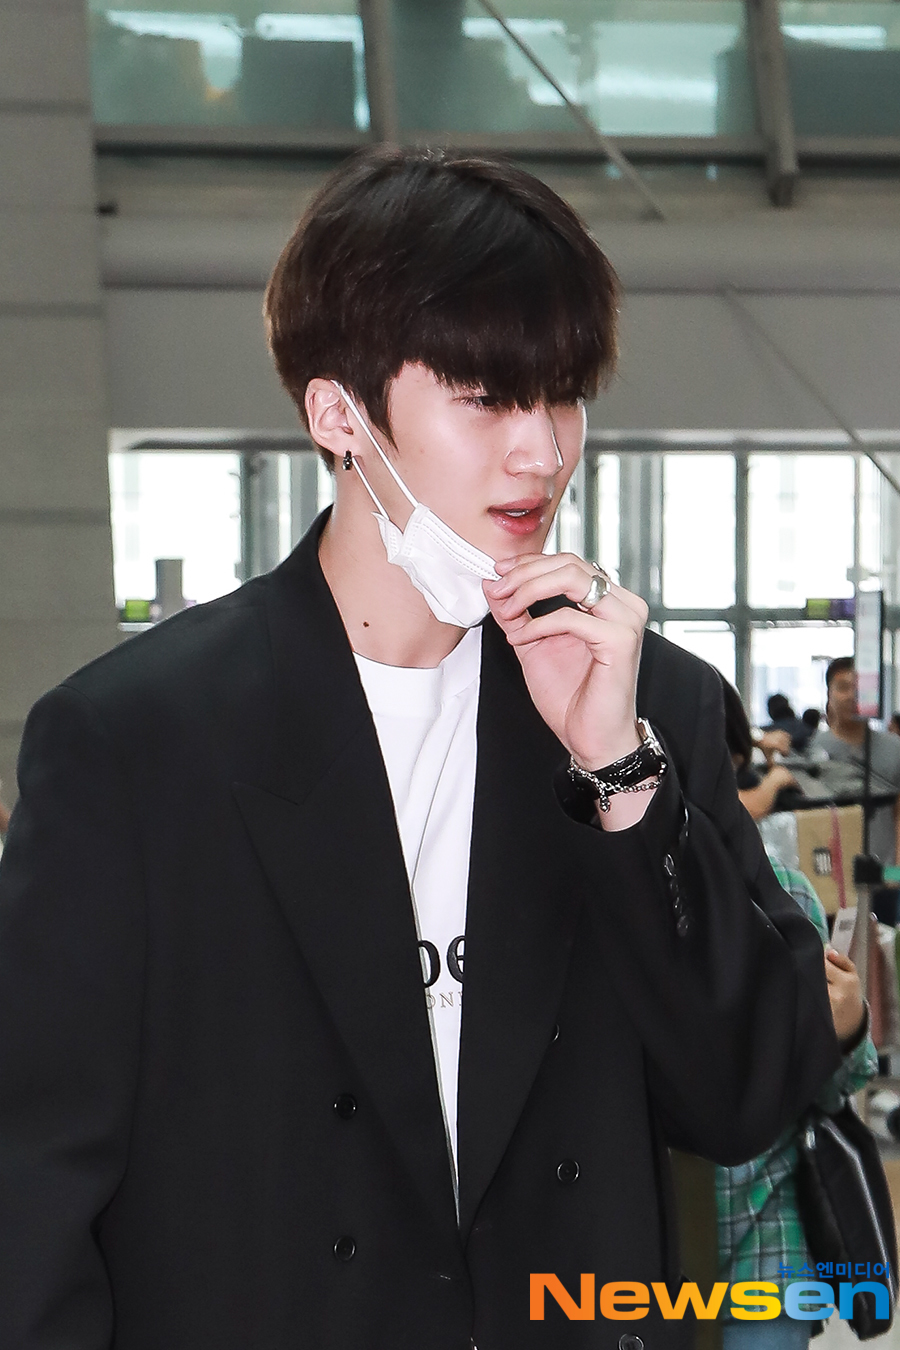 Pentagon (PENTAGON) member Yan An (YANAN) departed for Macau via Incheon International Airport, a Chinese version of Running Man Run filming car, which takes place in Macau on the afternoon of May 14.Yean, a member of Pentagon (PENTAGON), is heading to the departure hall with an airport fashion.#Yan An #YANAN #PENTAGON #Pentagon #Incheon Airport # Airport Fashionkim ki-tae